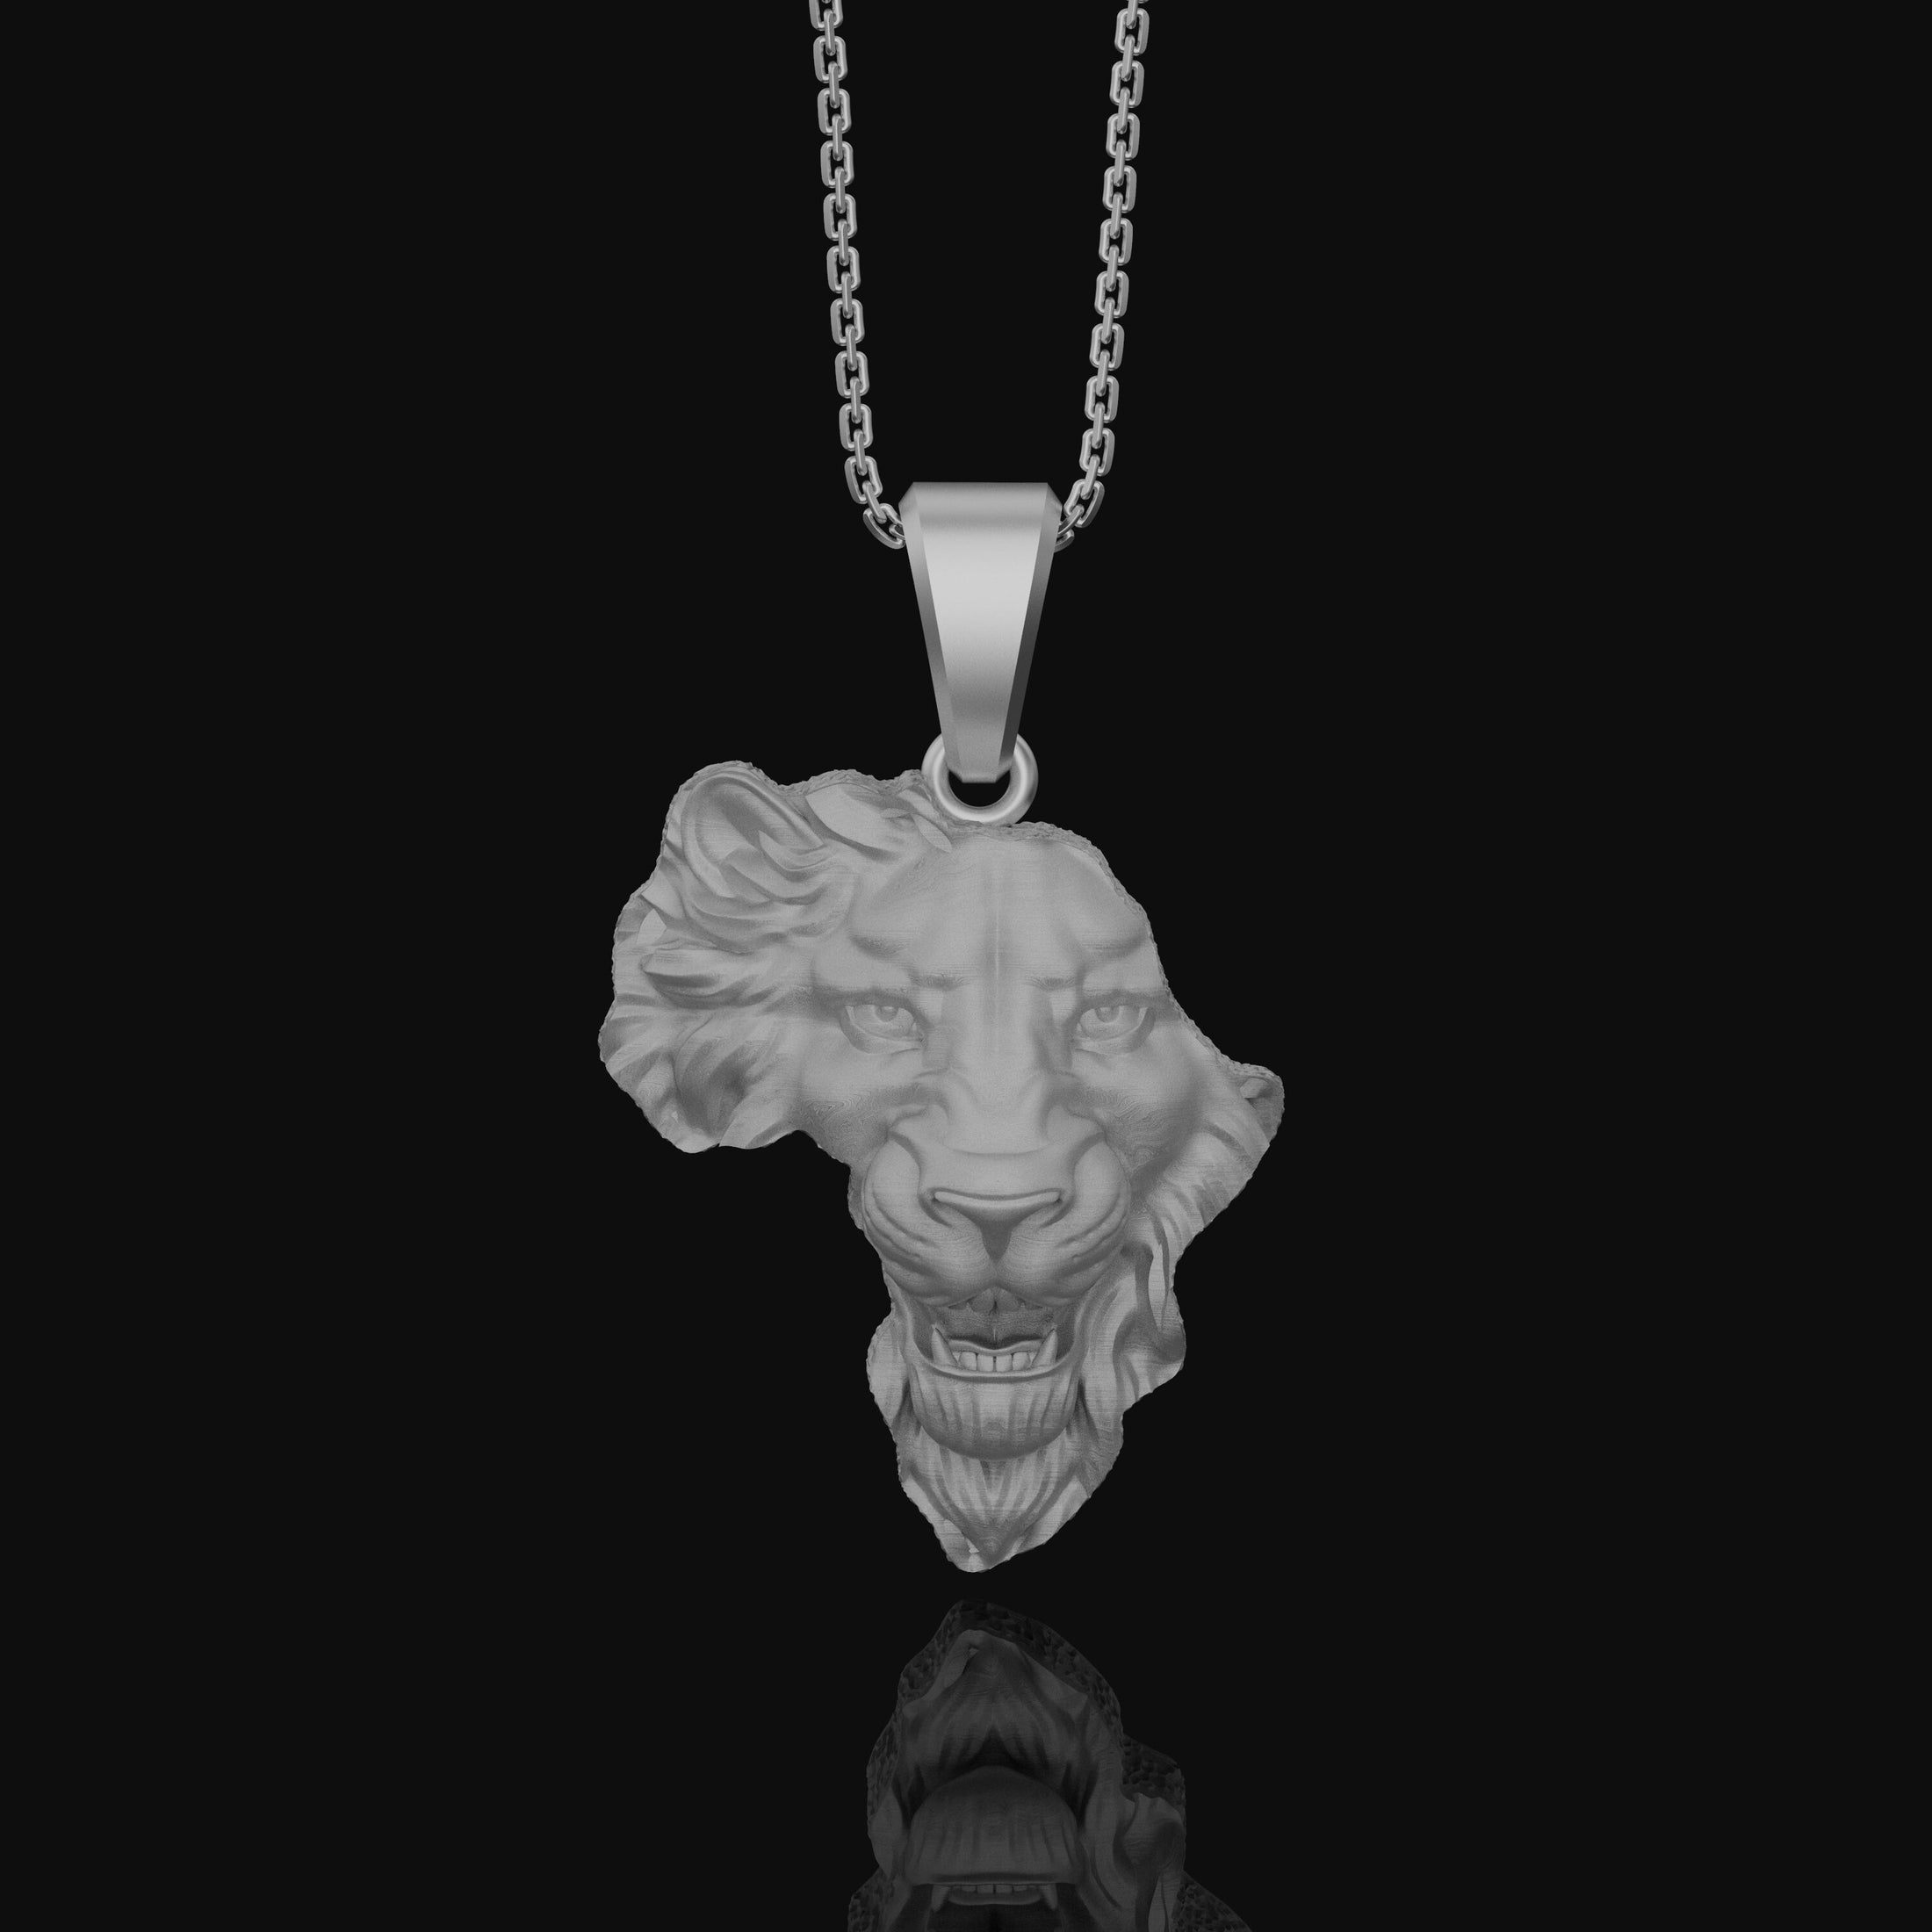 Silver Africa Continent Shaped Lion Head Necklace - Majestic Safari Style Pendant, Elegant Wildlife African Pride Jewelry Polished Matte